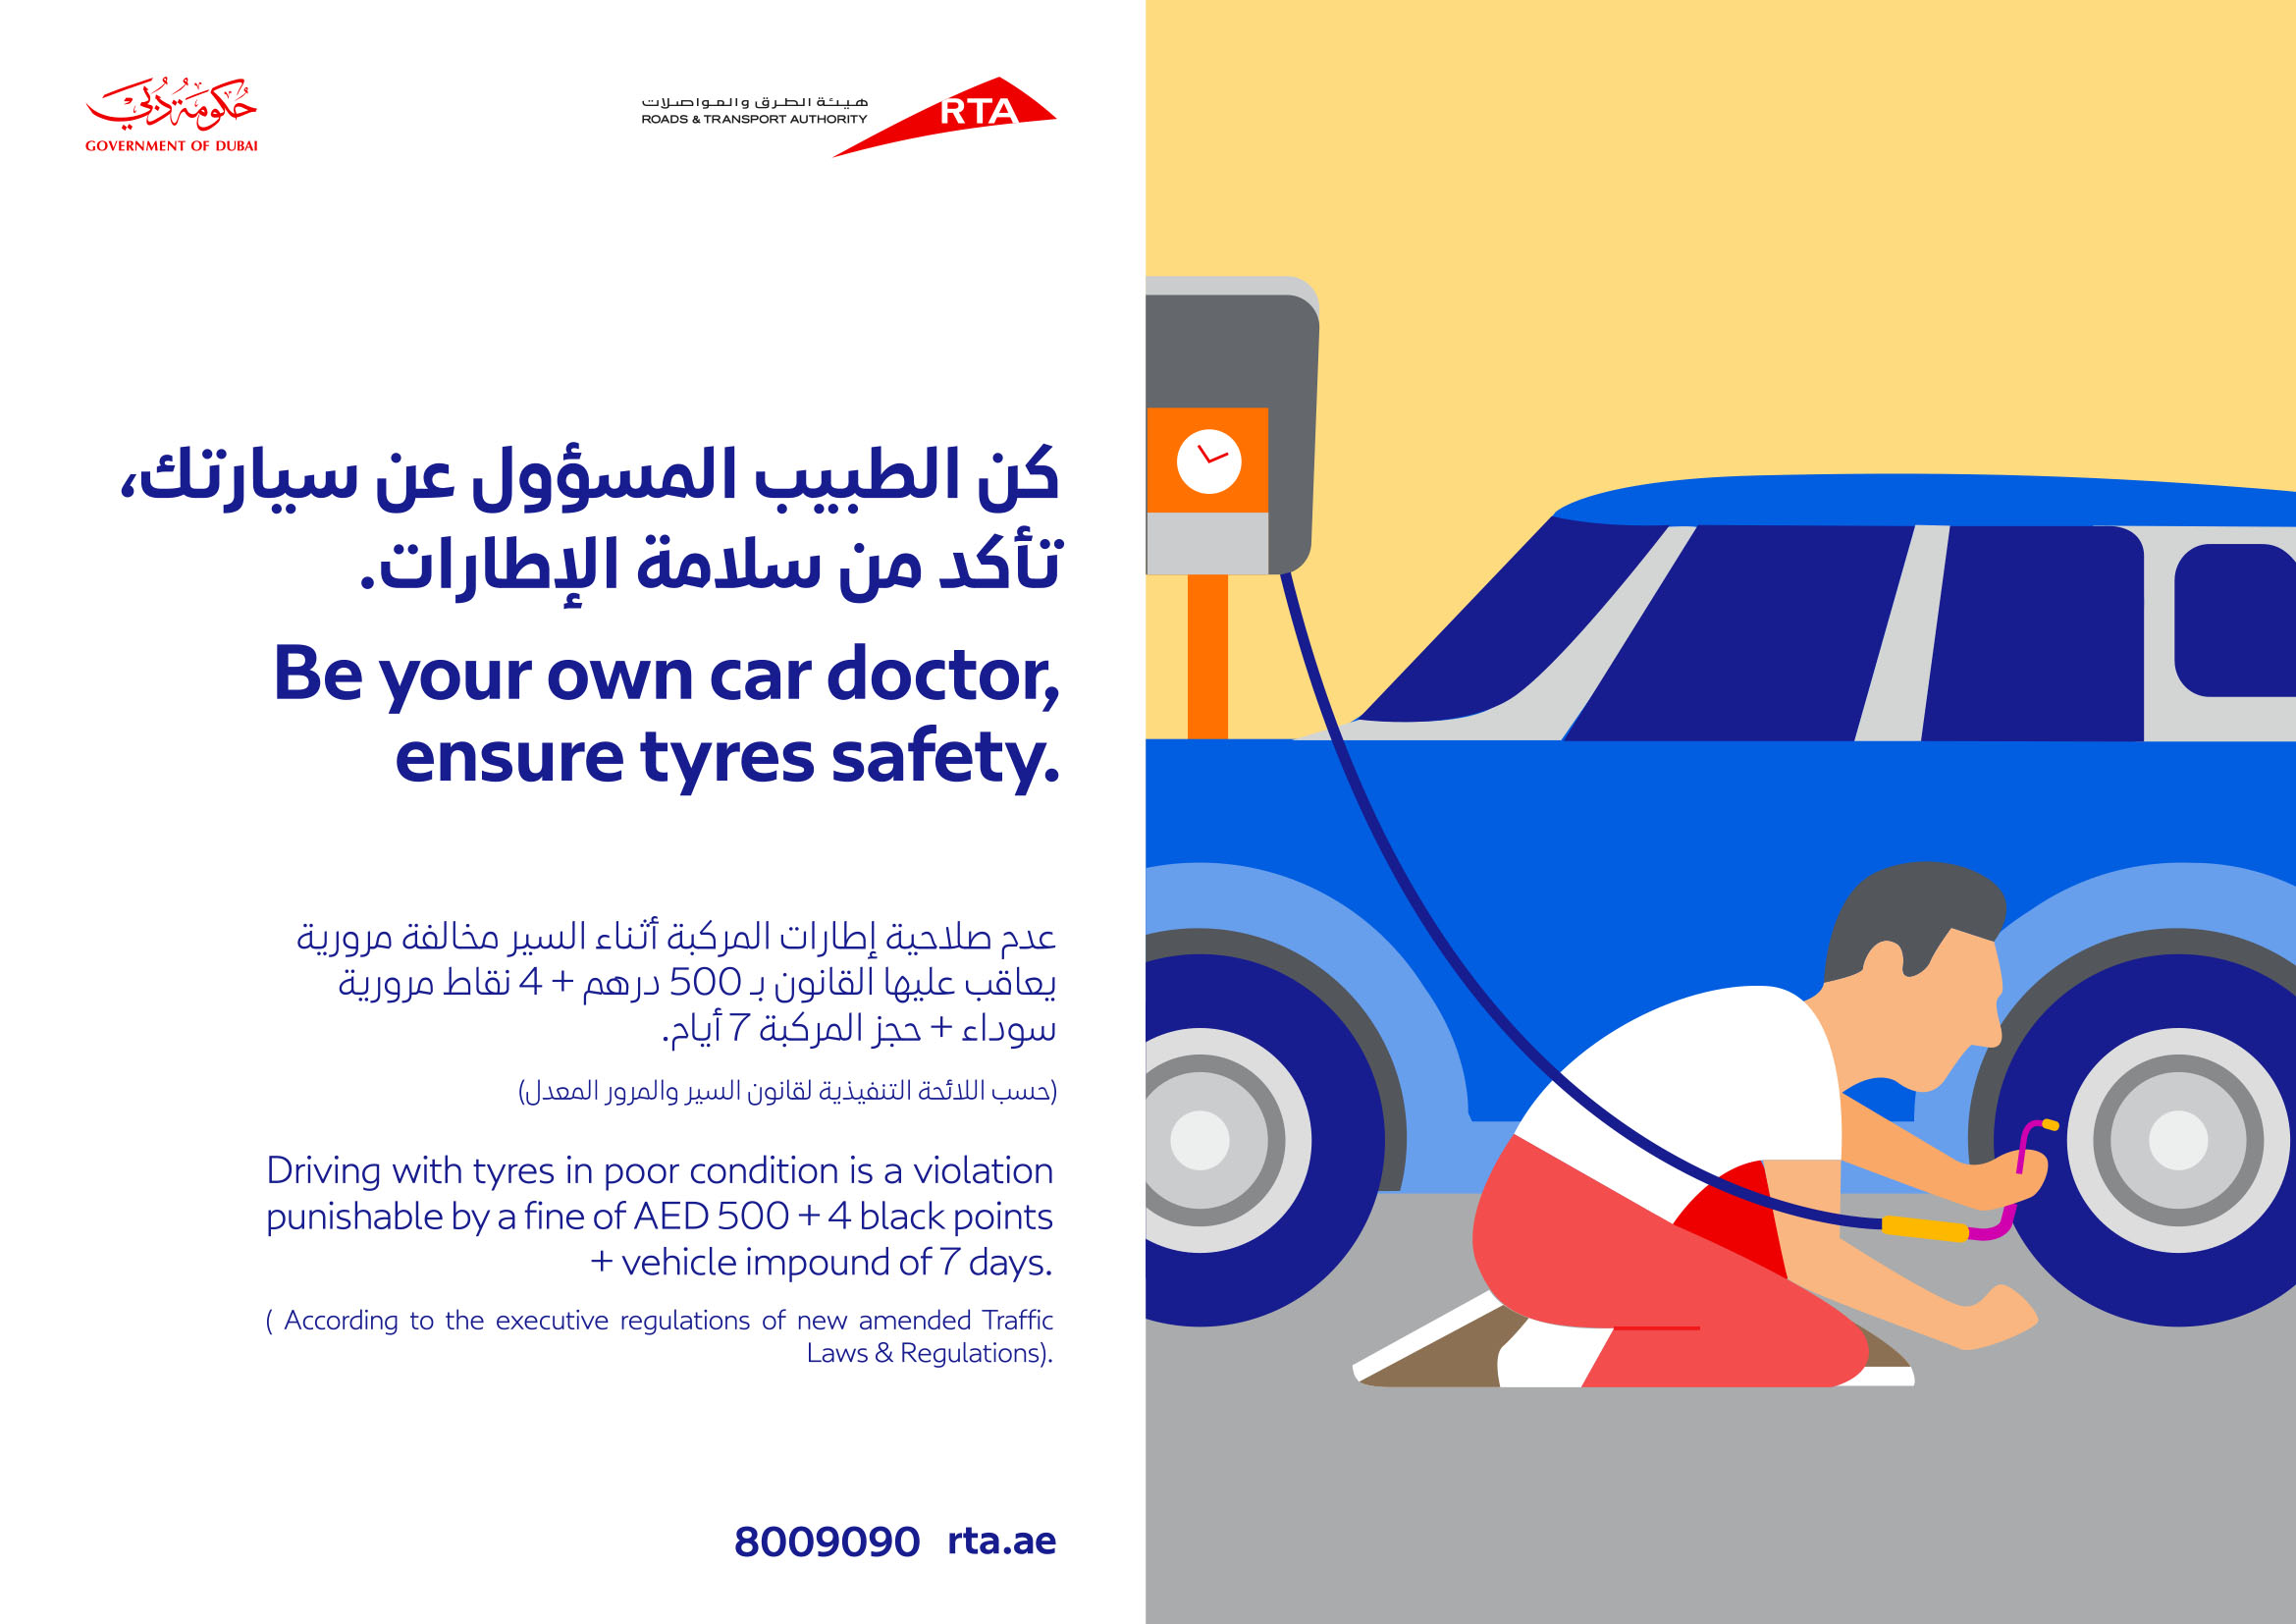 All-RTA Road Safety RTA websites for General-Horizontal